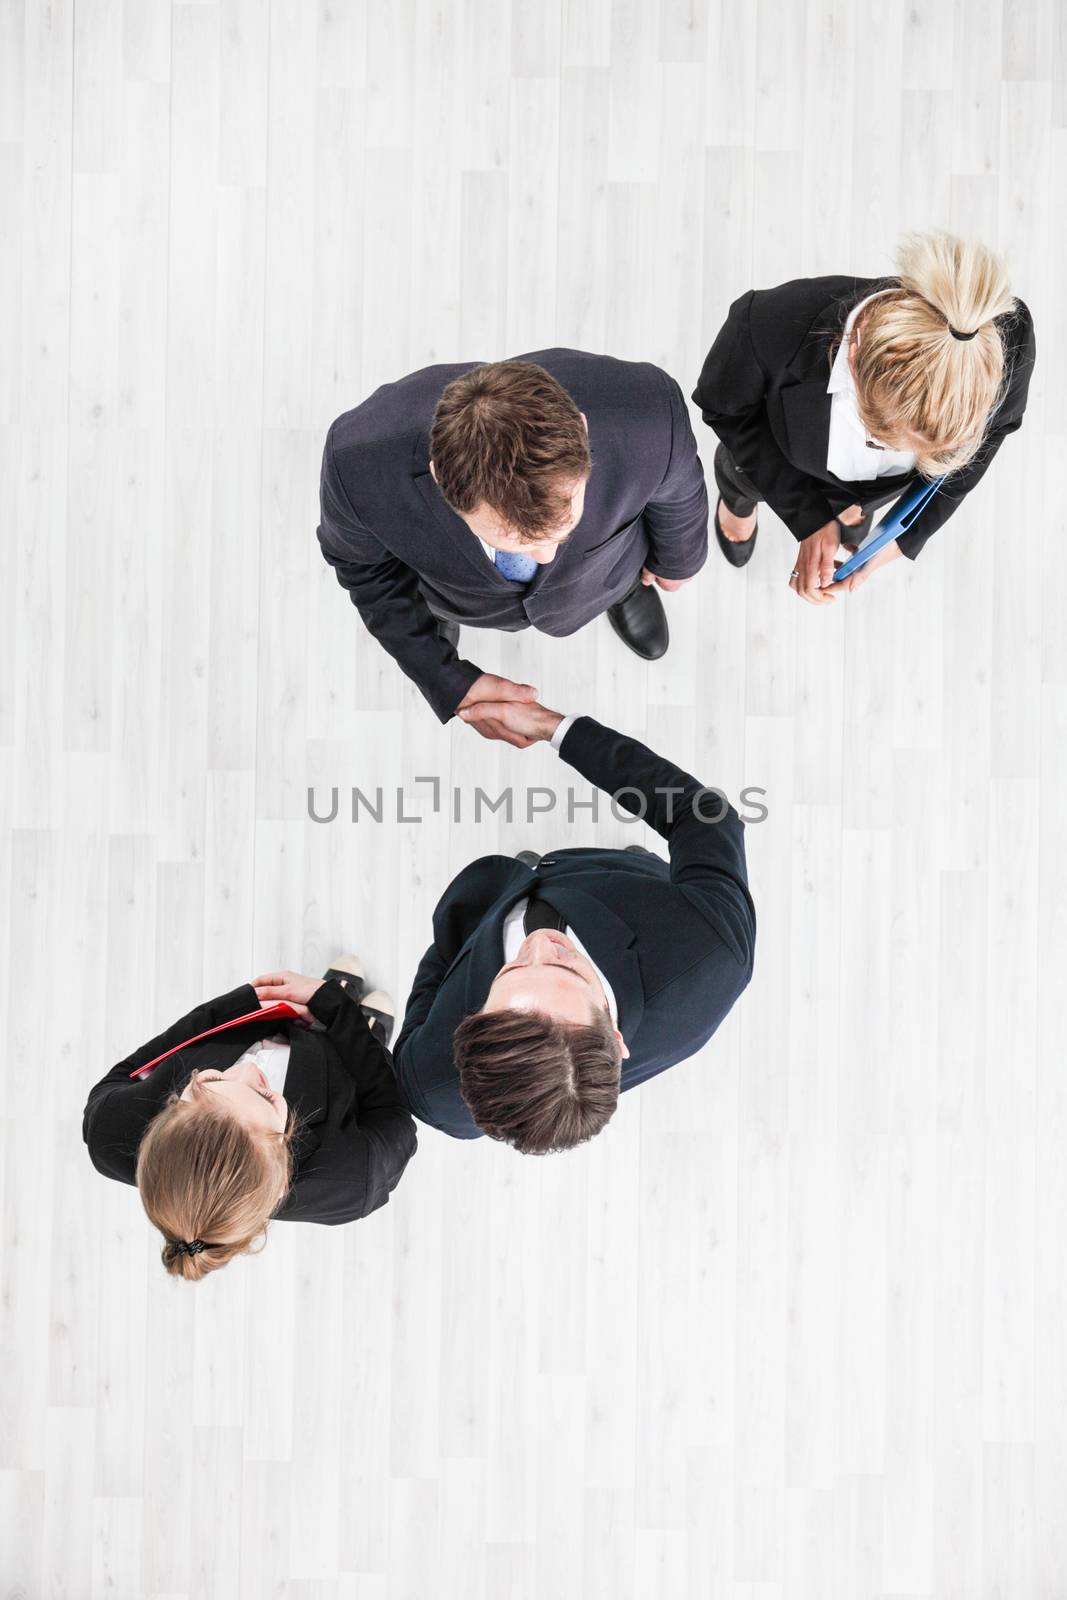 Business people shaking hands, finishing up a meeting, top view with copy space